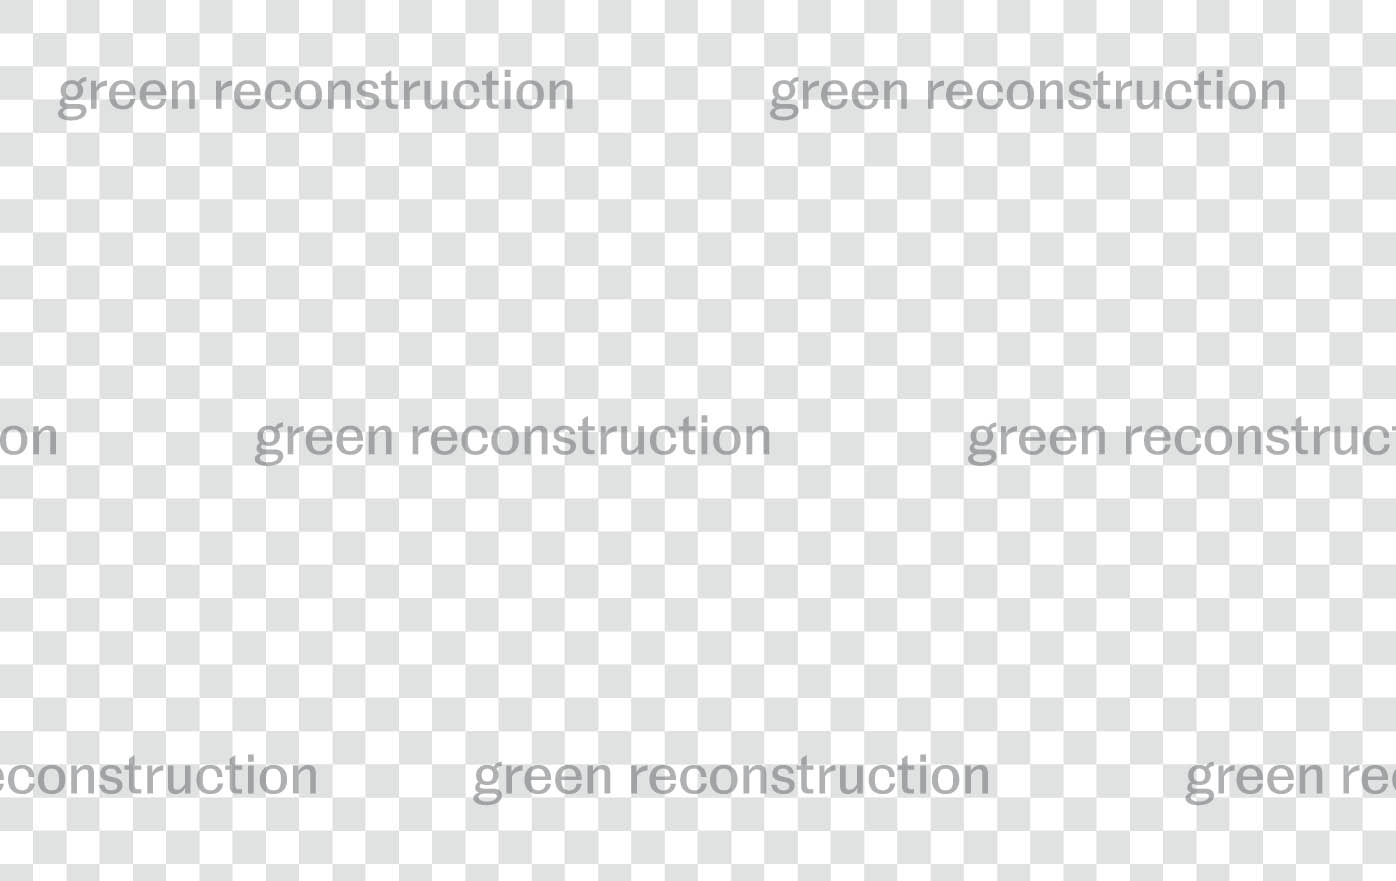 "Green Reconstruction" in lowercase is repeated on a checkered background — all is only in grey and white.